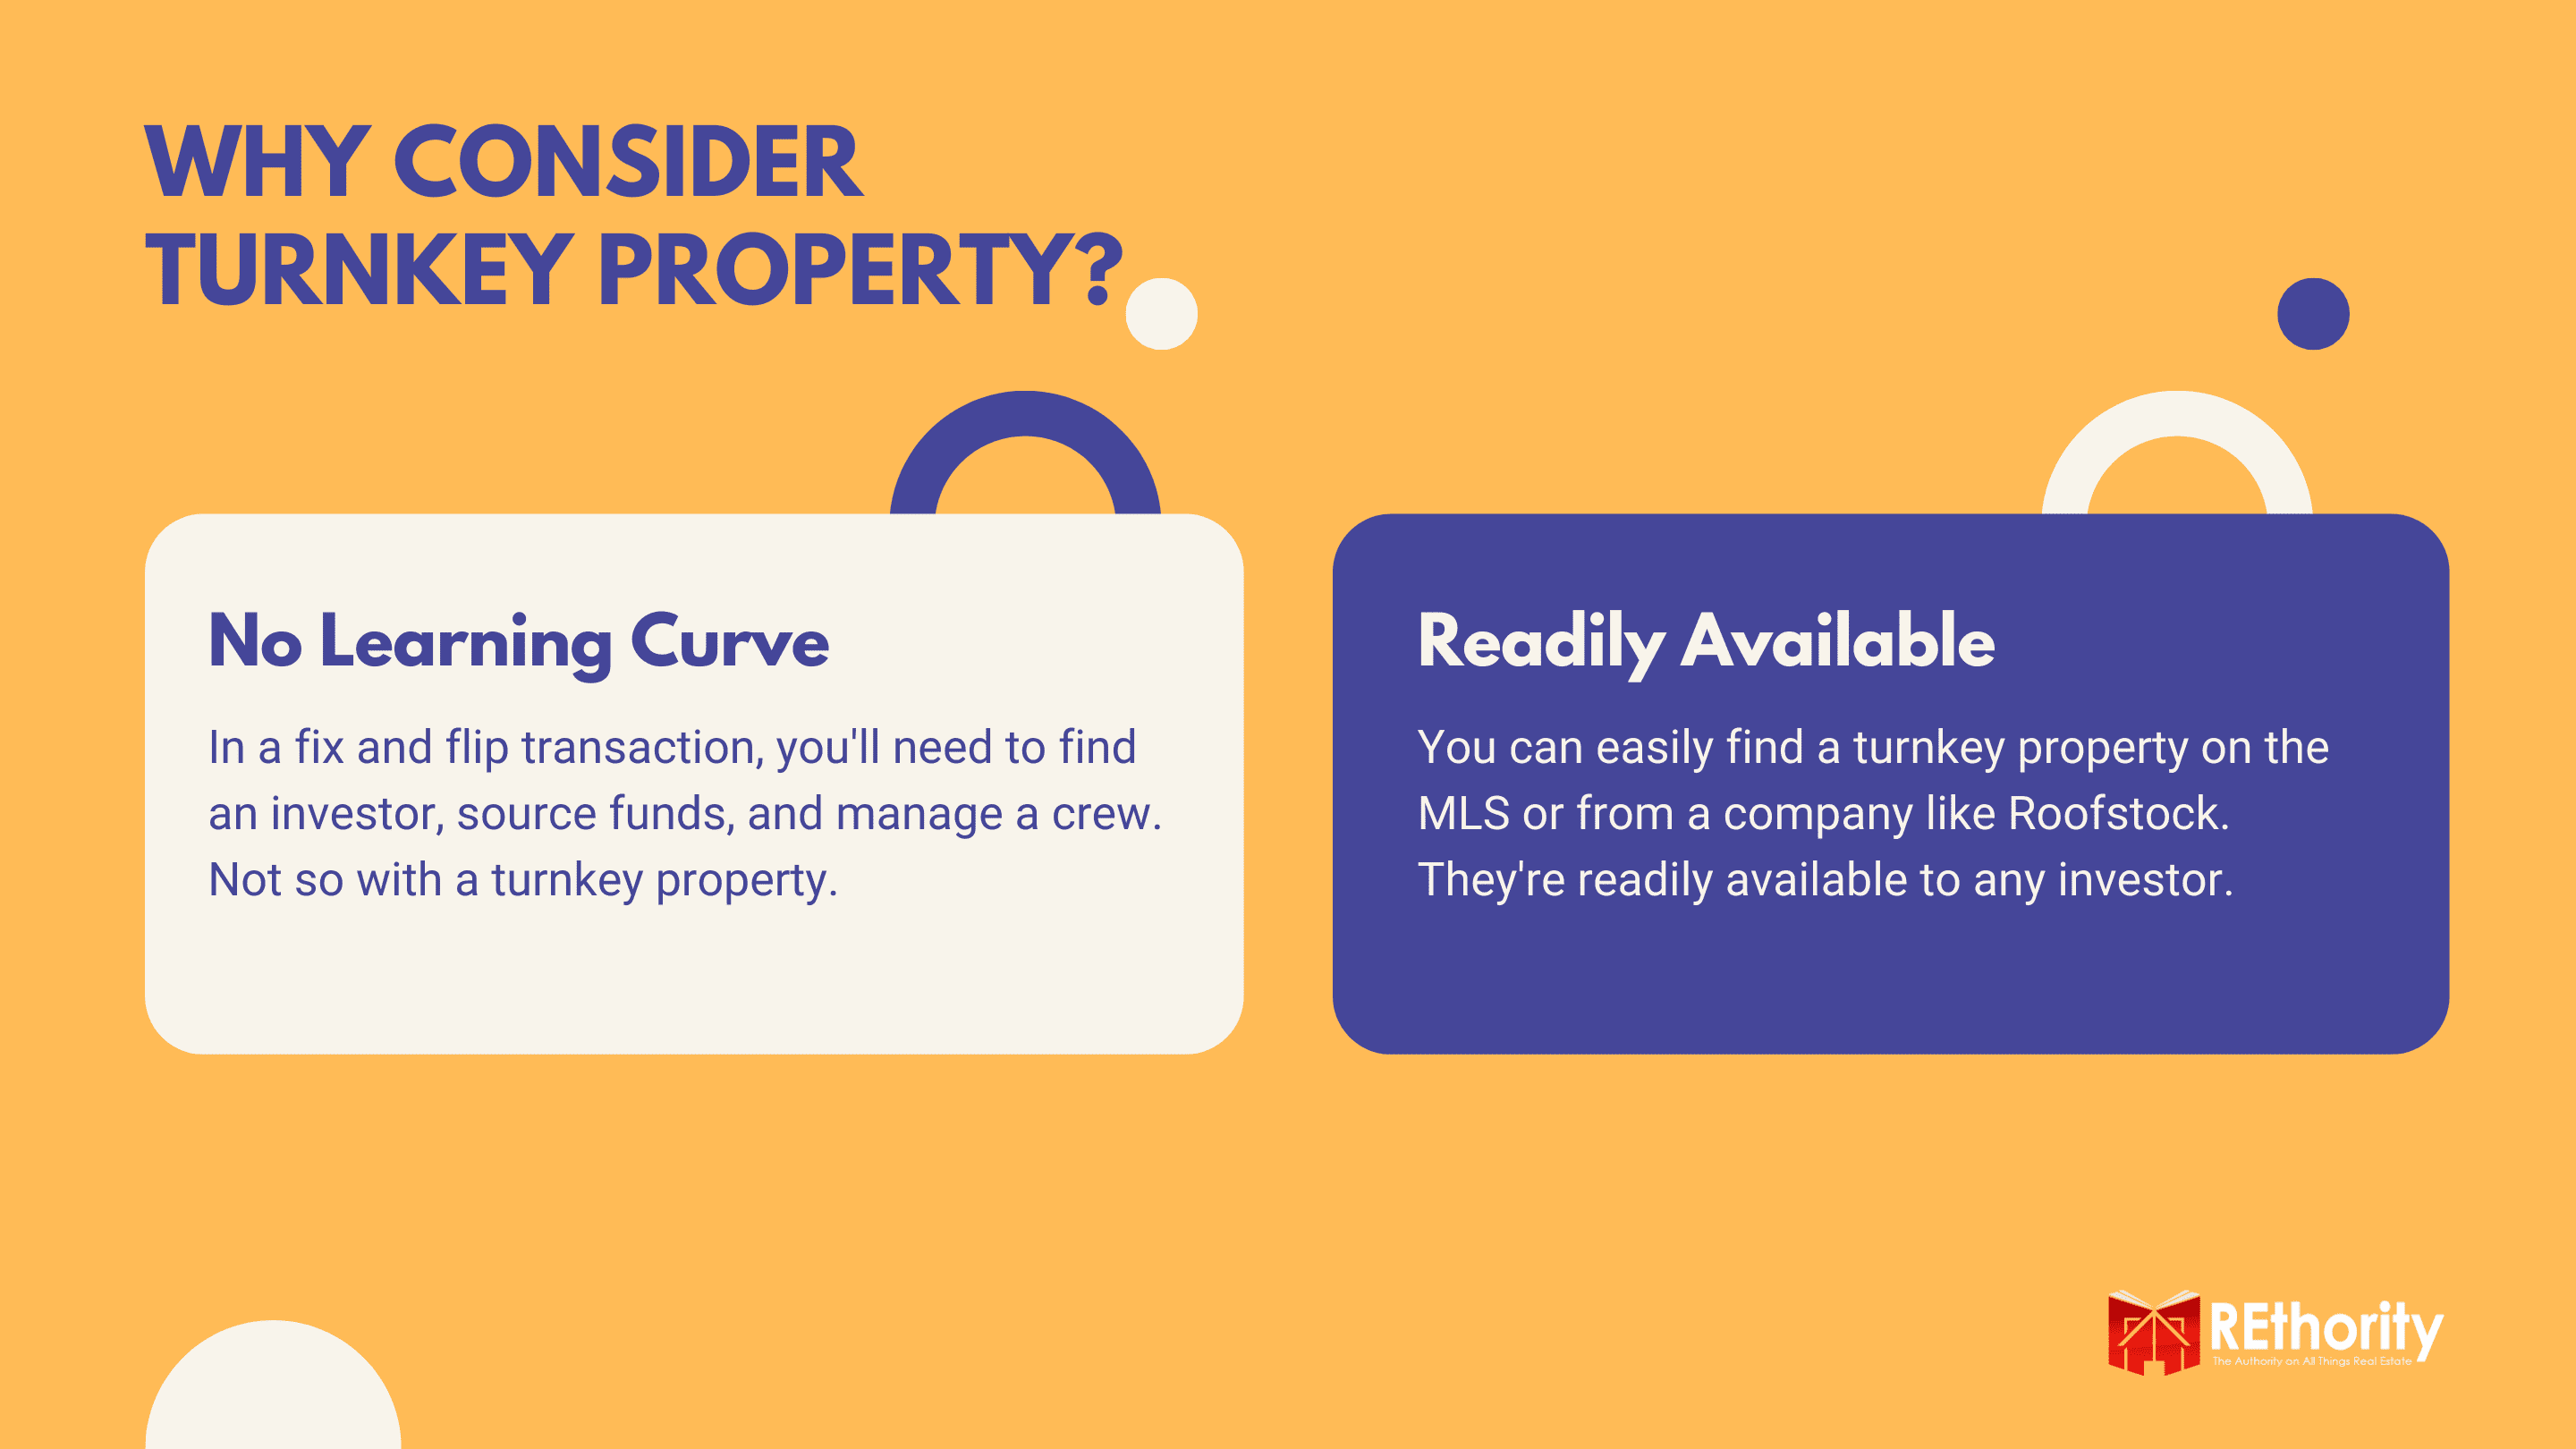 Why Consider Turnkey Property graphic highlighting why you'd want to skip the fix and flip